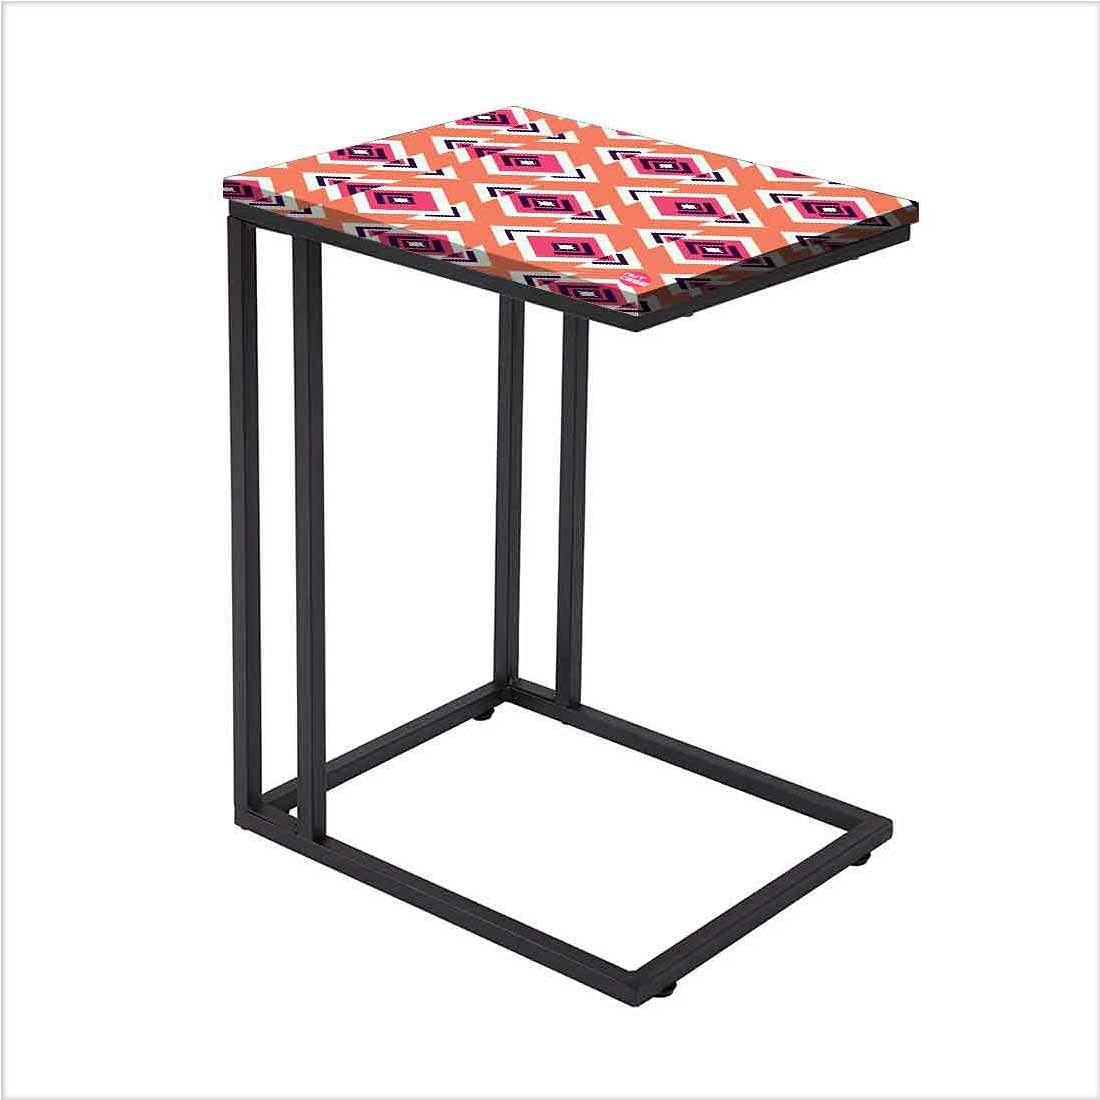 C Shaped Outdoor Table For Sofa - Diamond Pattern Nutcase